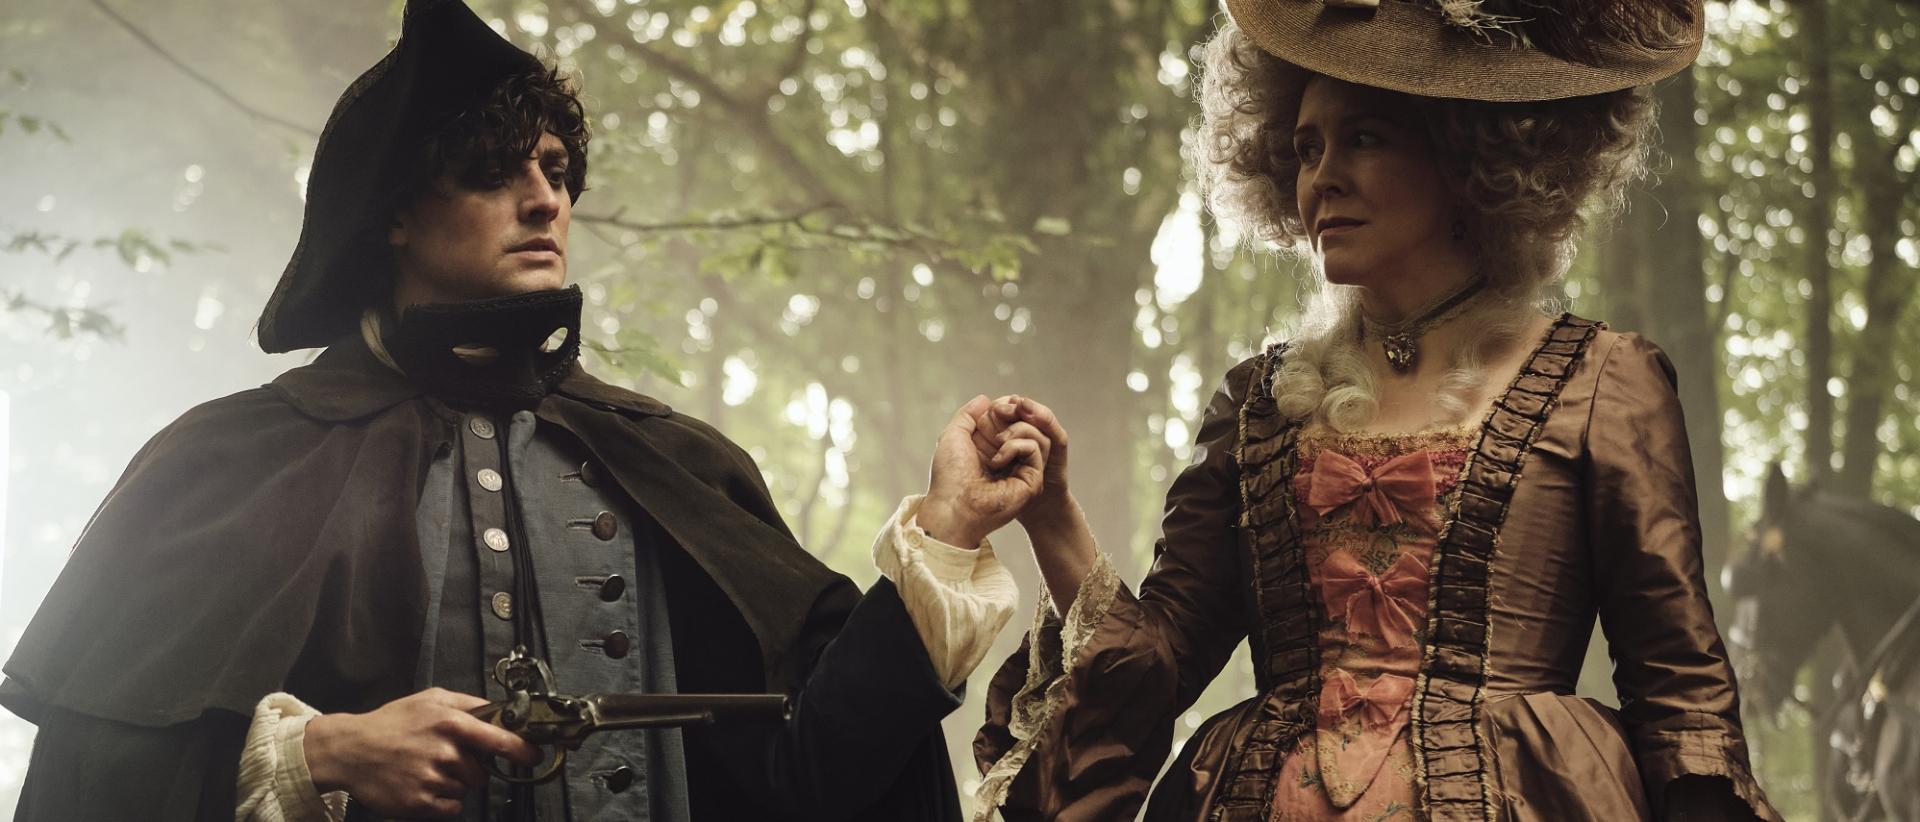 still from timestalker featuring two people in georgian costume standing in a wood holding hands. the person on the left is holding an old pistol.